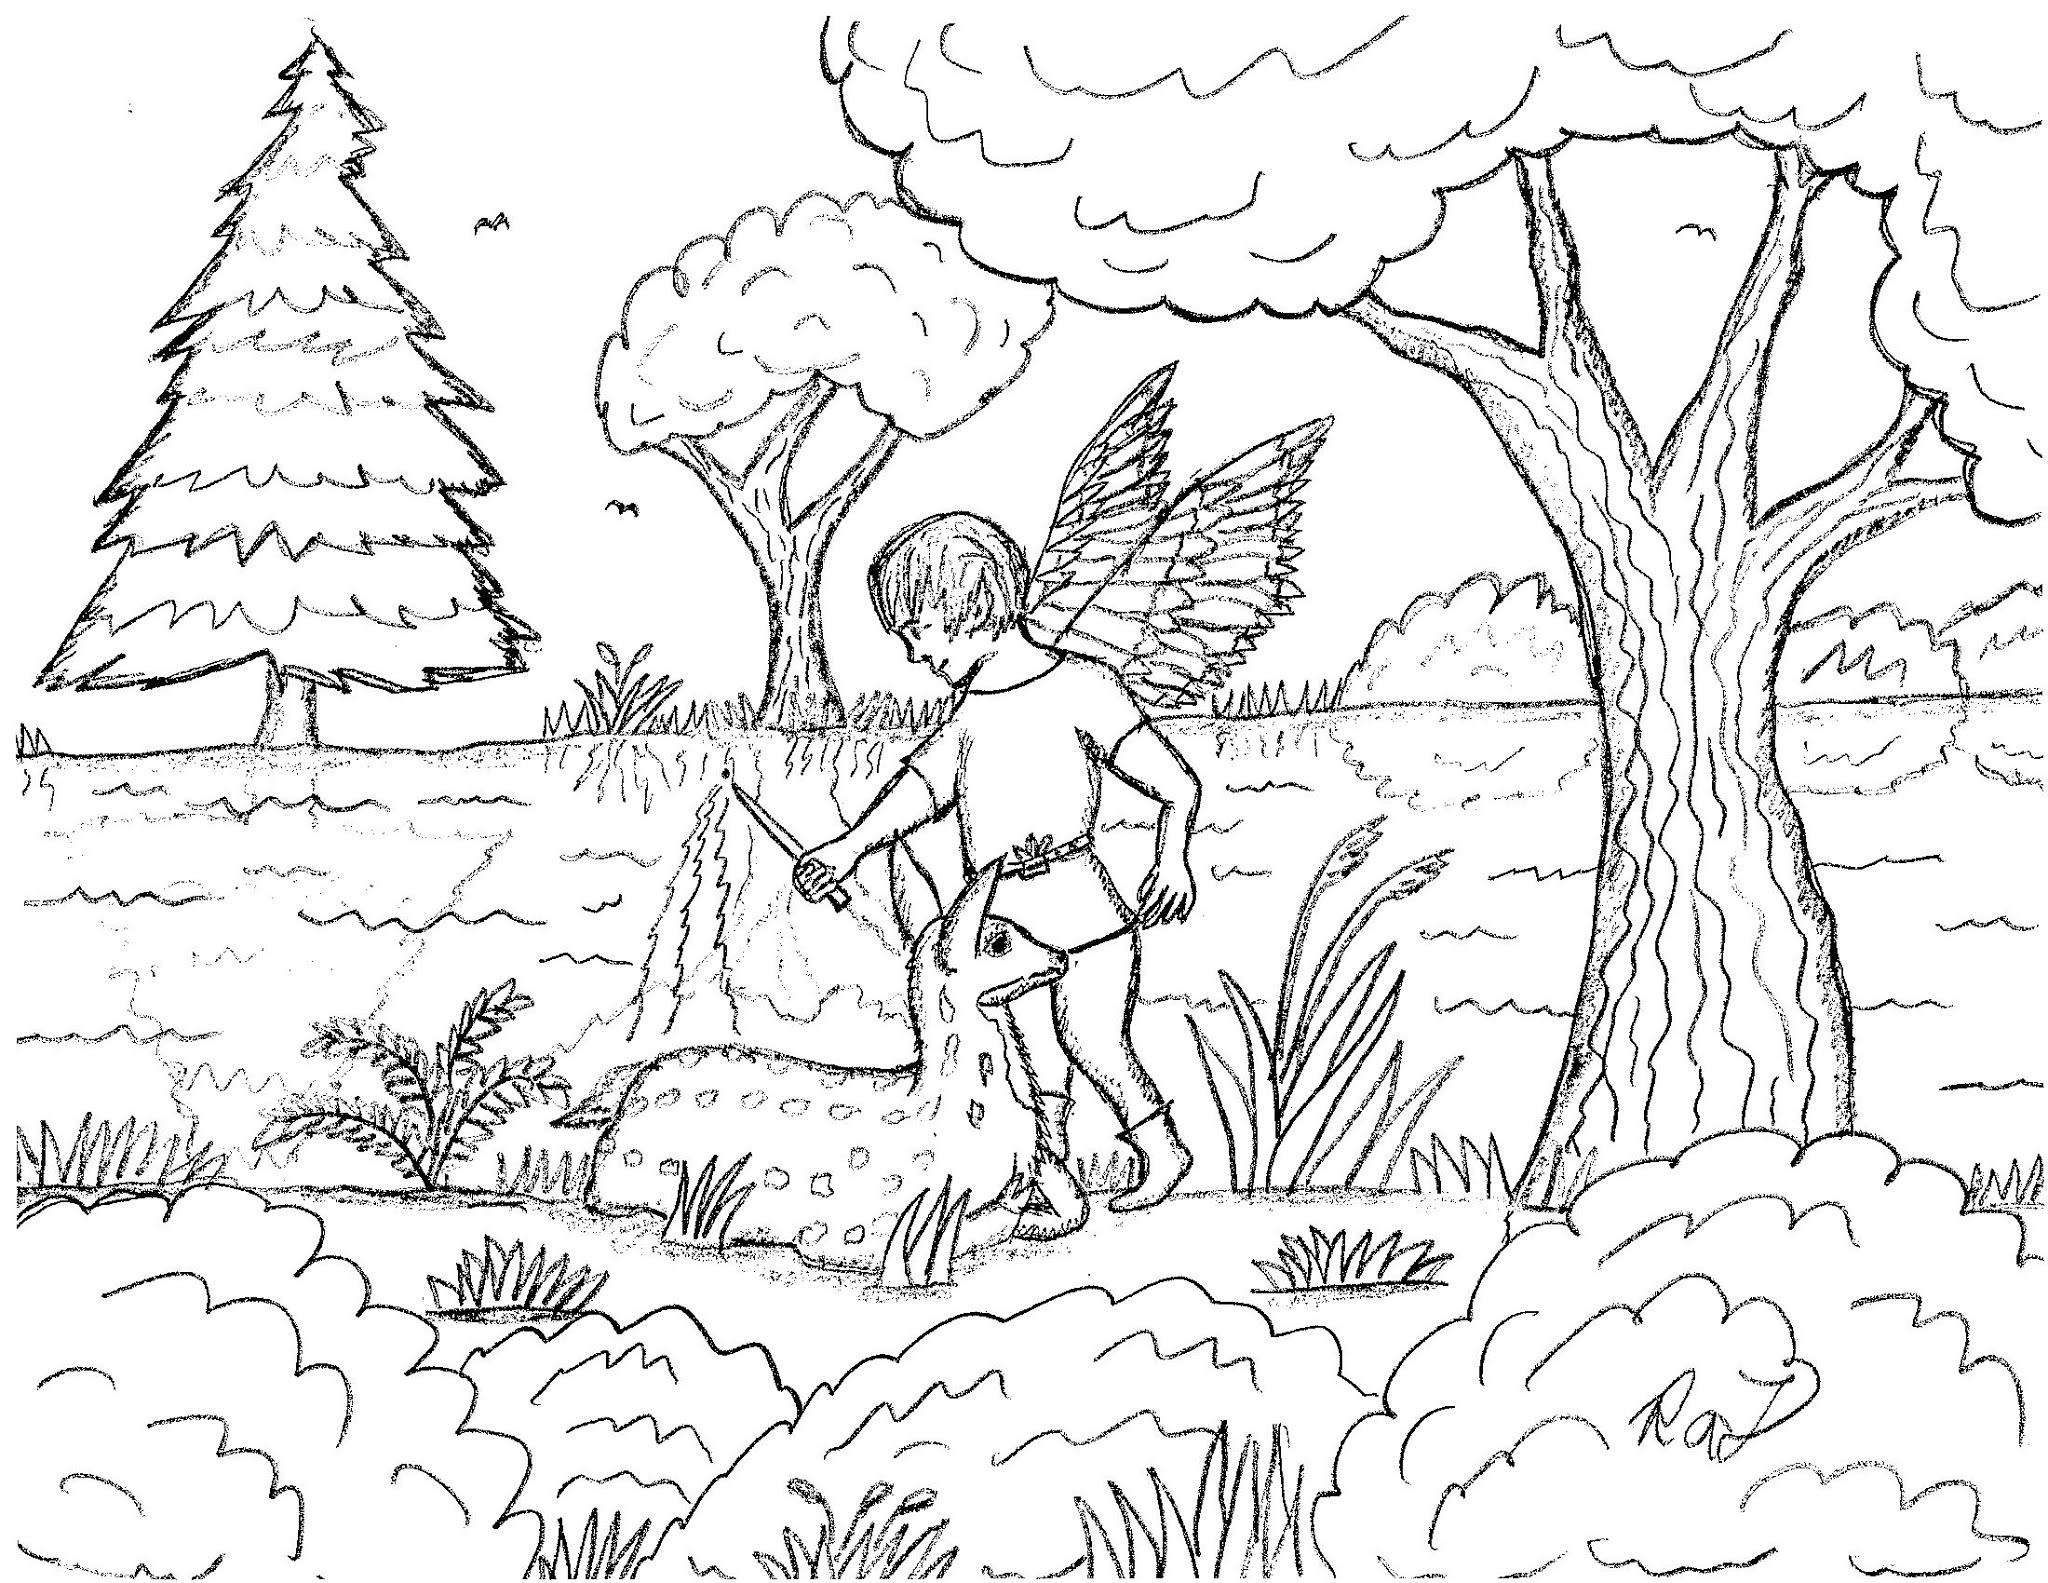 Robin's Great Coloring Pages: A New Wildlife Fairy drawing and some other  Wildlife Fairies coloring pages